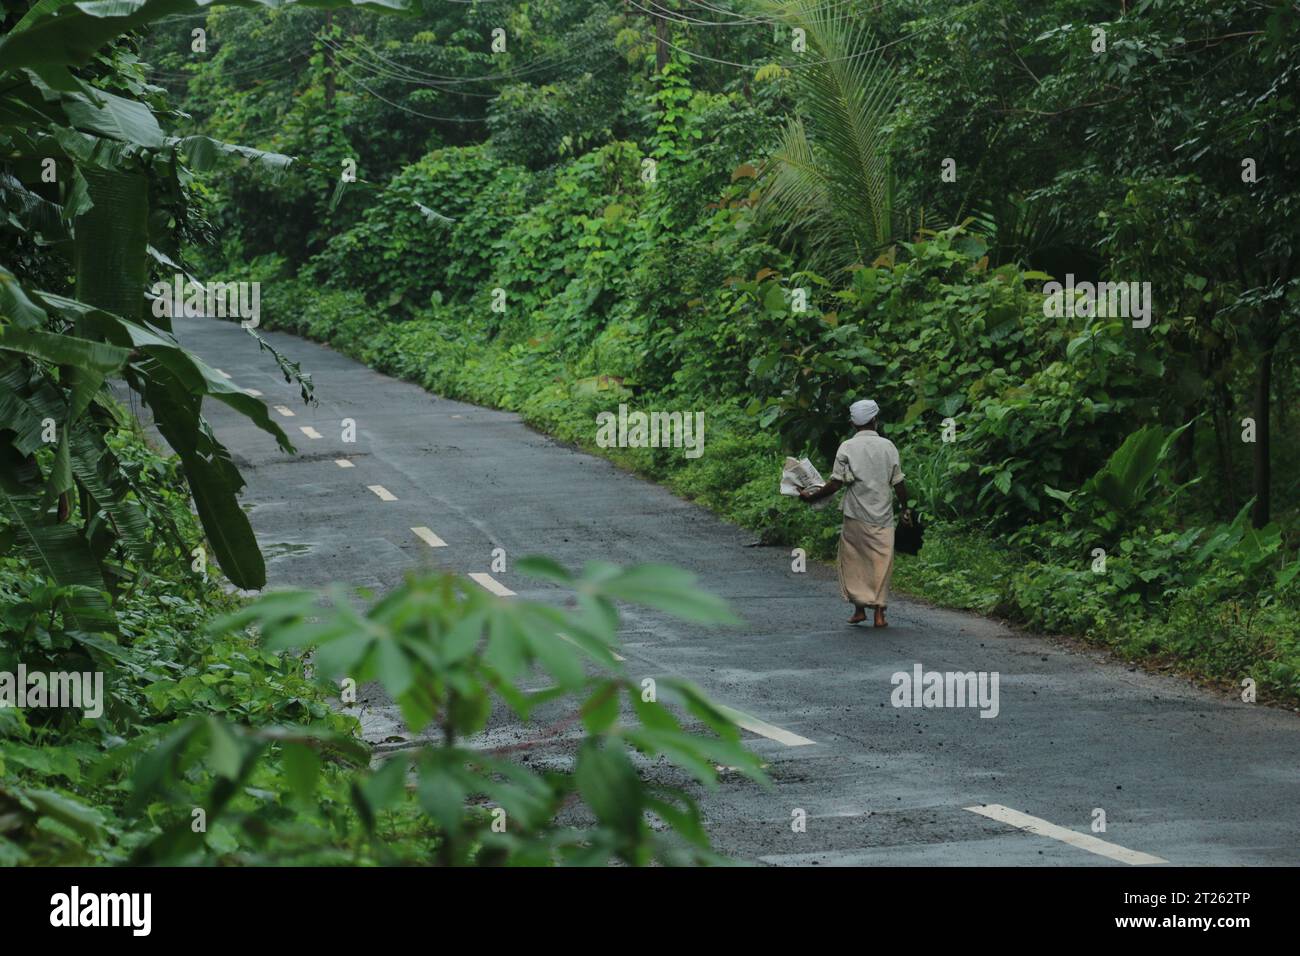 An old man walking on the road early morning in Kerala. Stock Photo